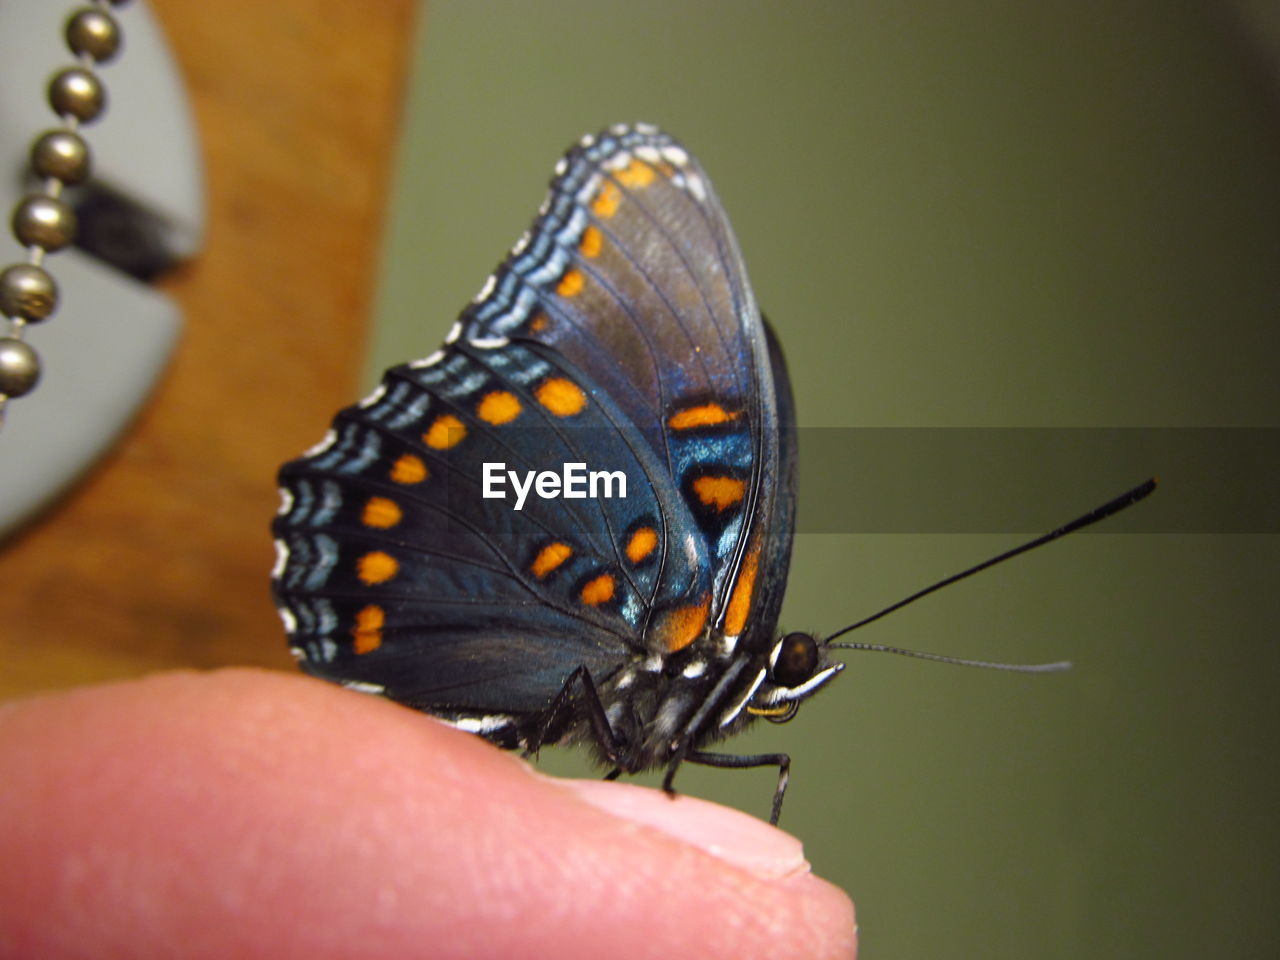 CLOSE-UP OF BUTTERFLY ON PERSON HAND